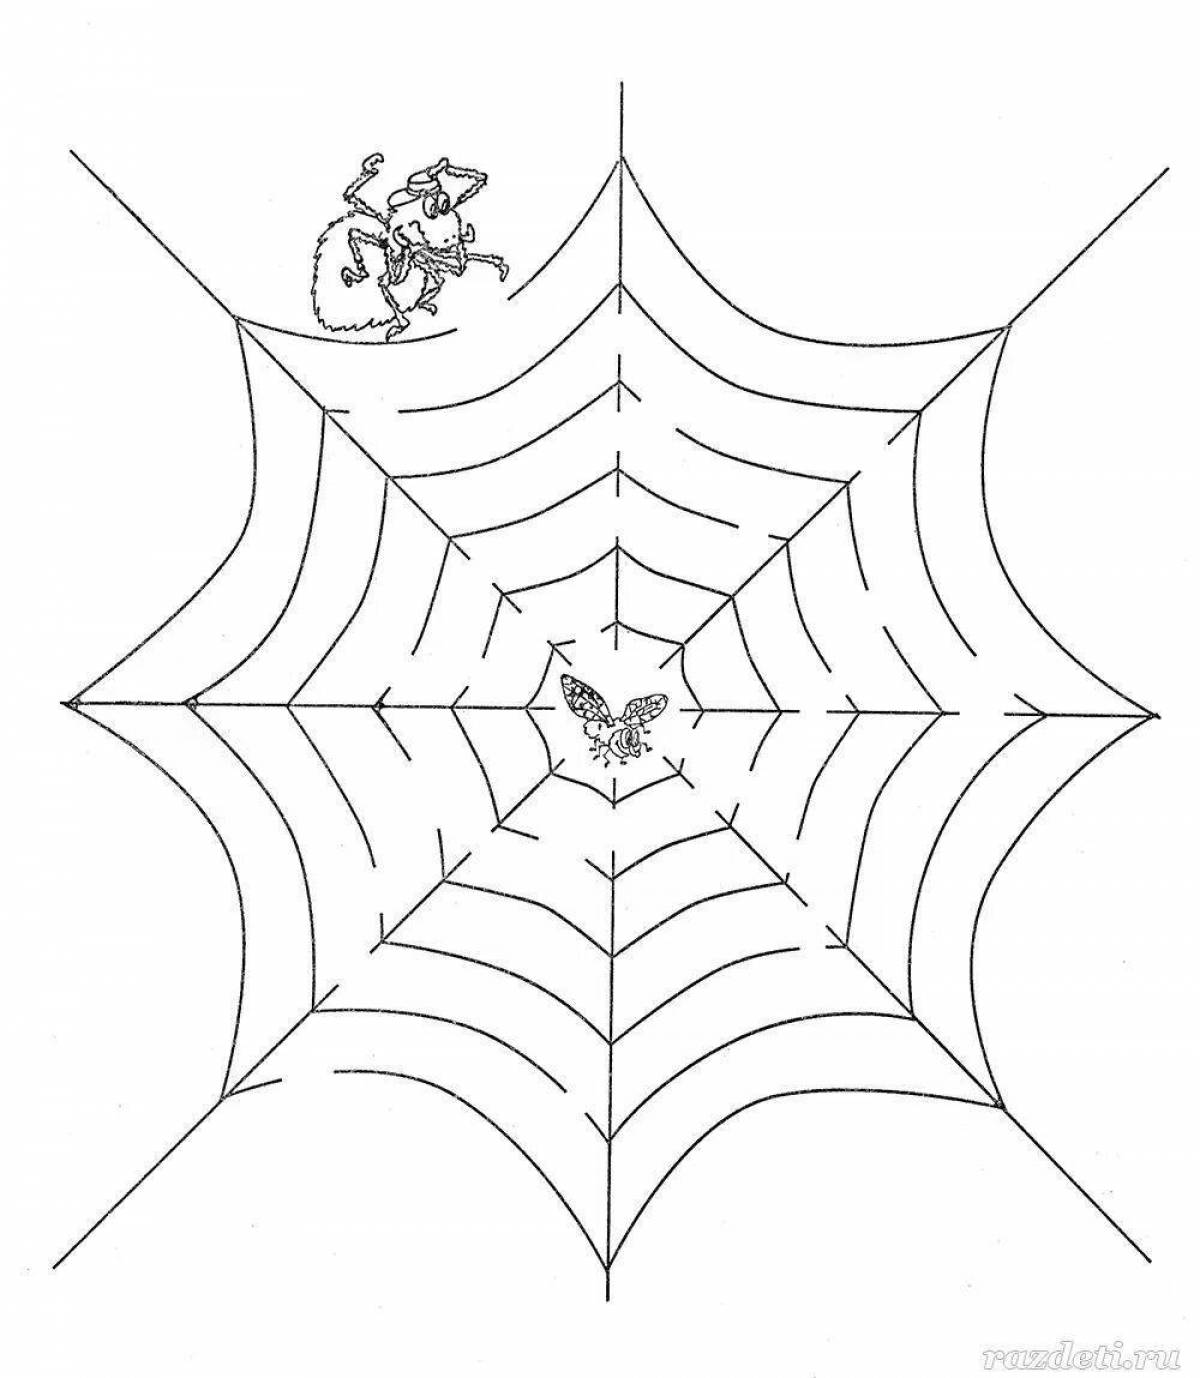 Interesting coloring web for kids